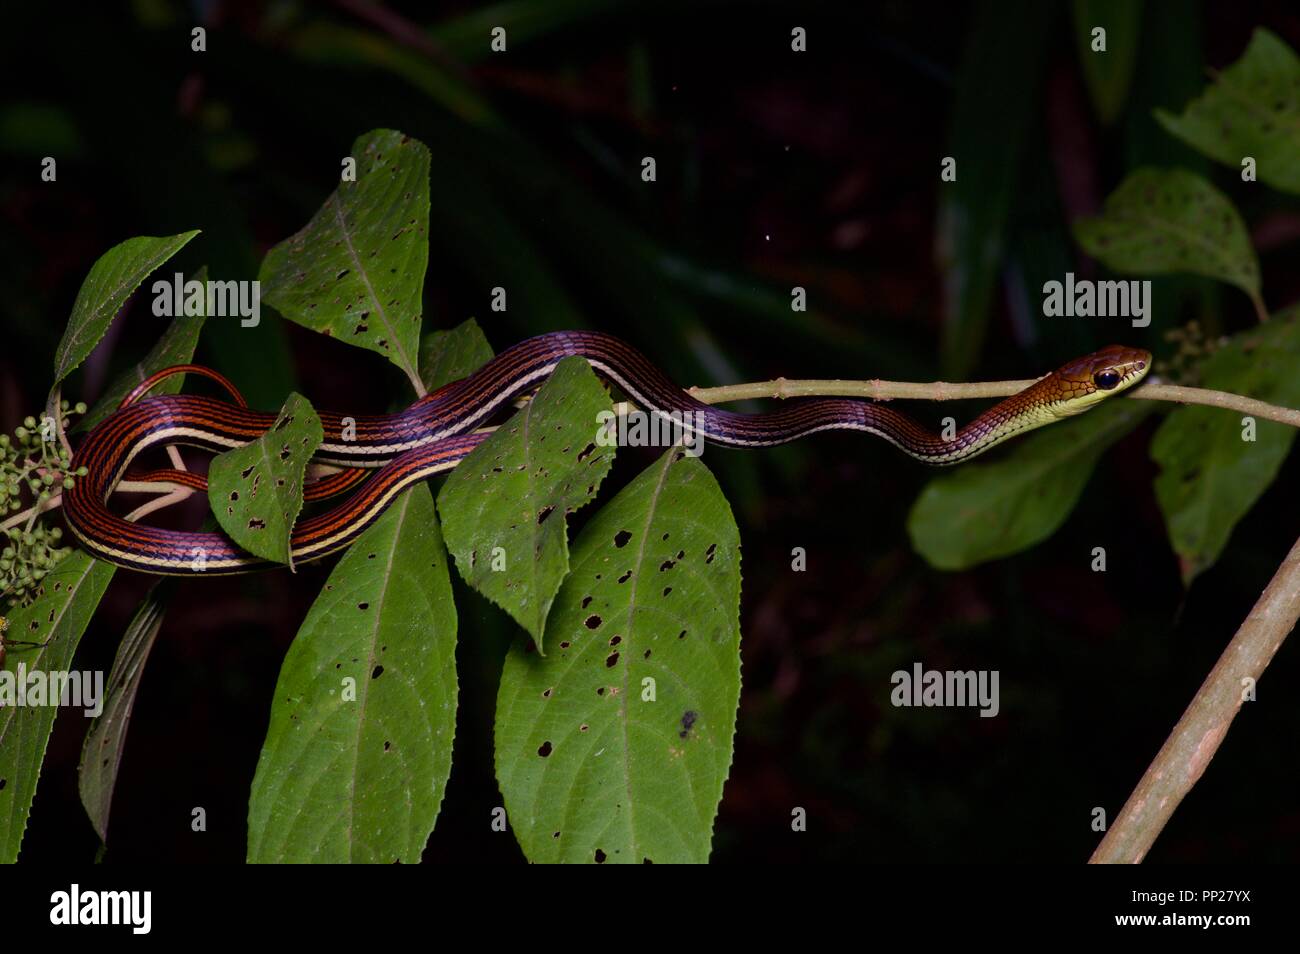 A Striped Bronzeback (Dendrelaphis caudolineatus) resting in vegetation at night in Danum Valley Conservation Area, Sabah, East Malaysia, Borneo Stock Photo